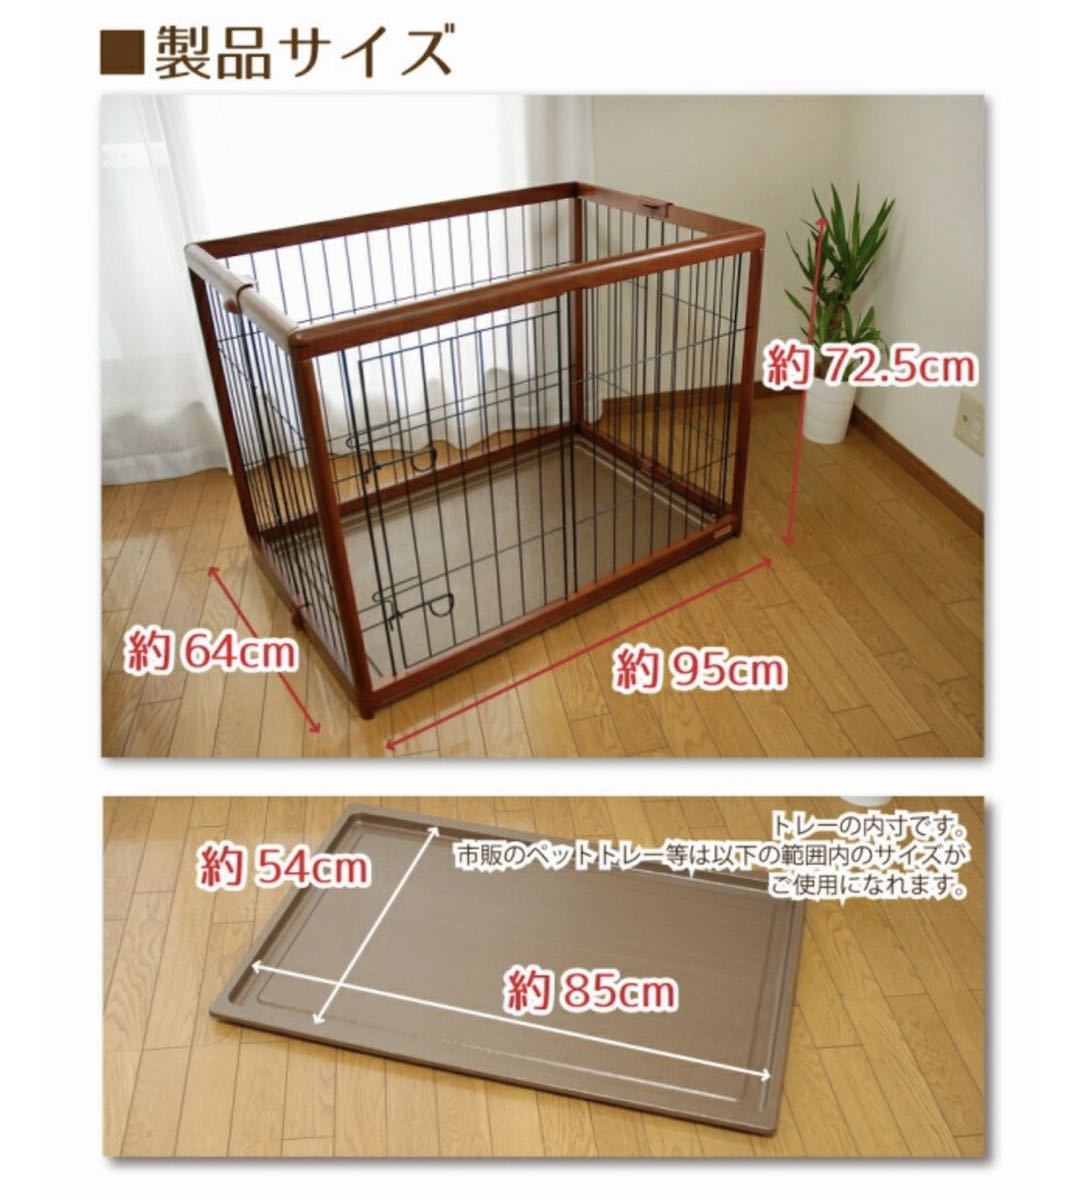  pet Circle JPC-95 Brown [ width 95cm type ] goods with special circumstances tube NO.F42